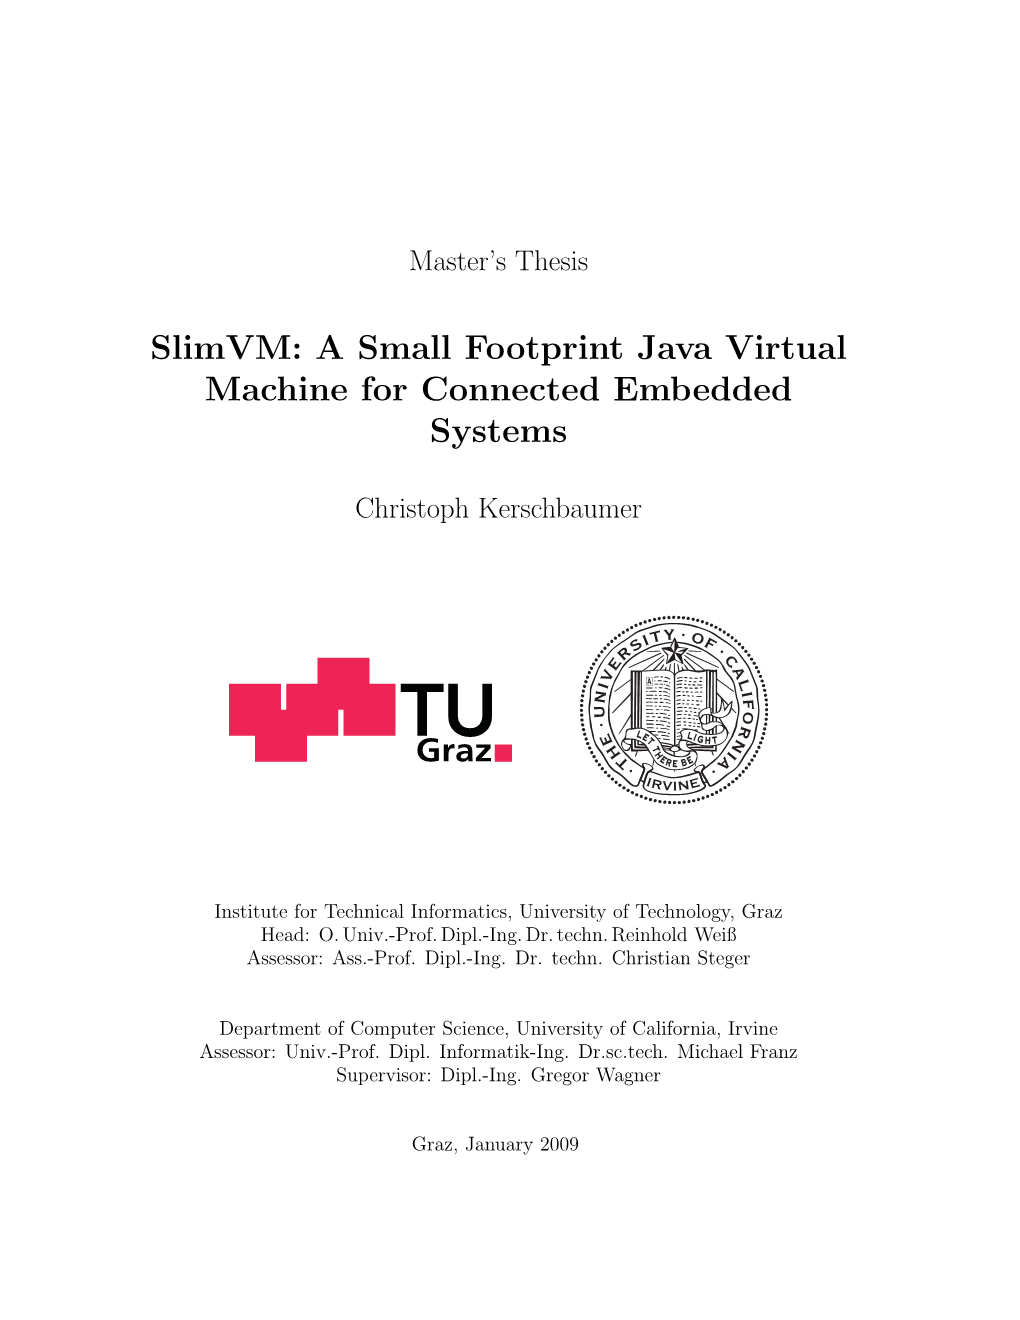 Slimvm: a Small Footprint Java Virtual Machine for Connected Embedded Systems